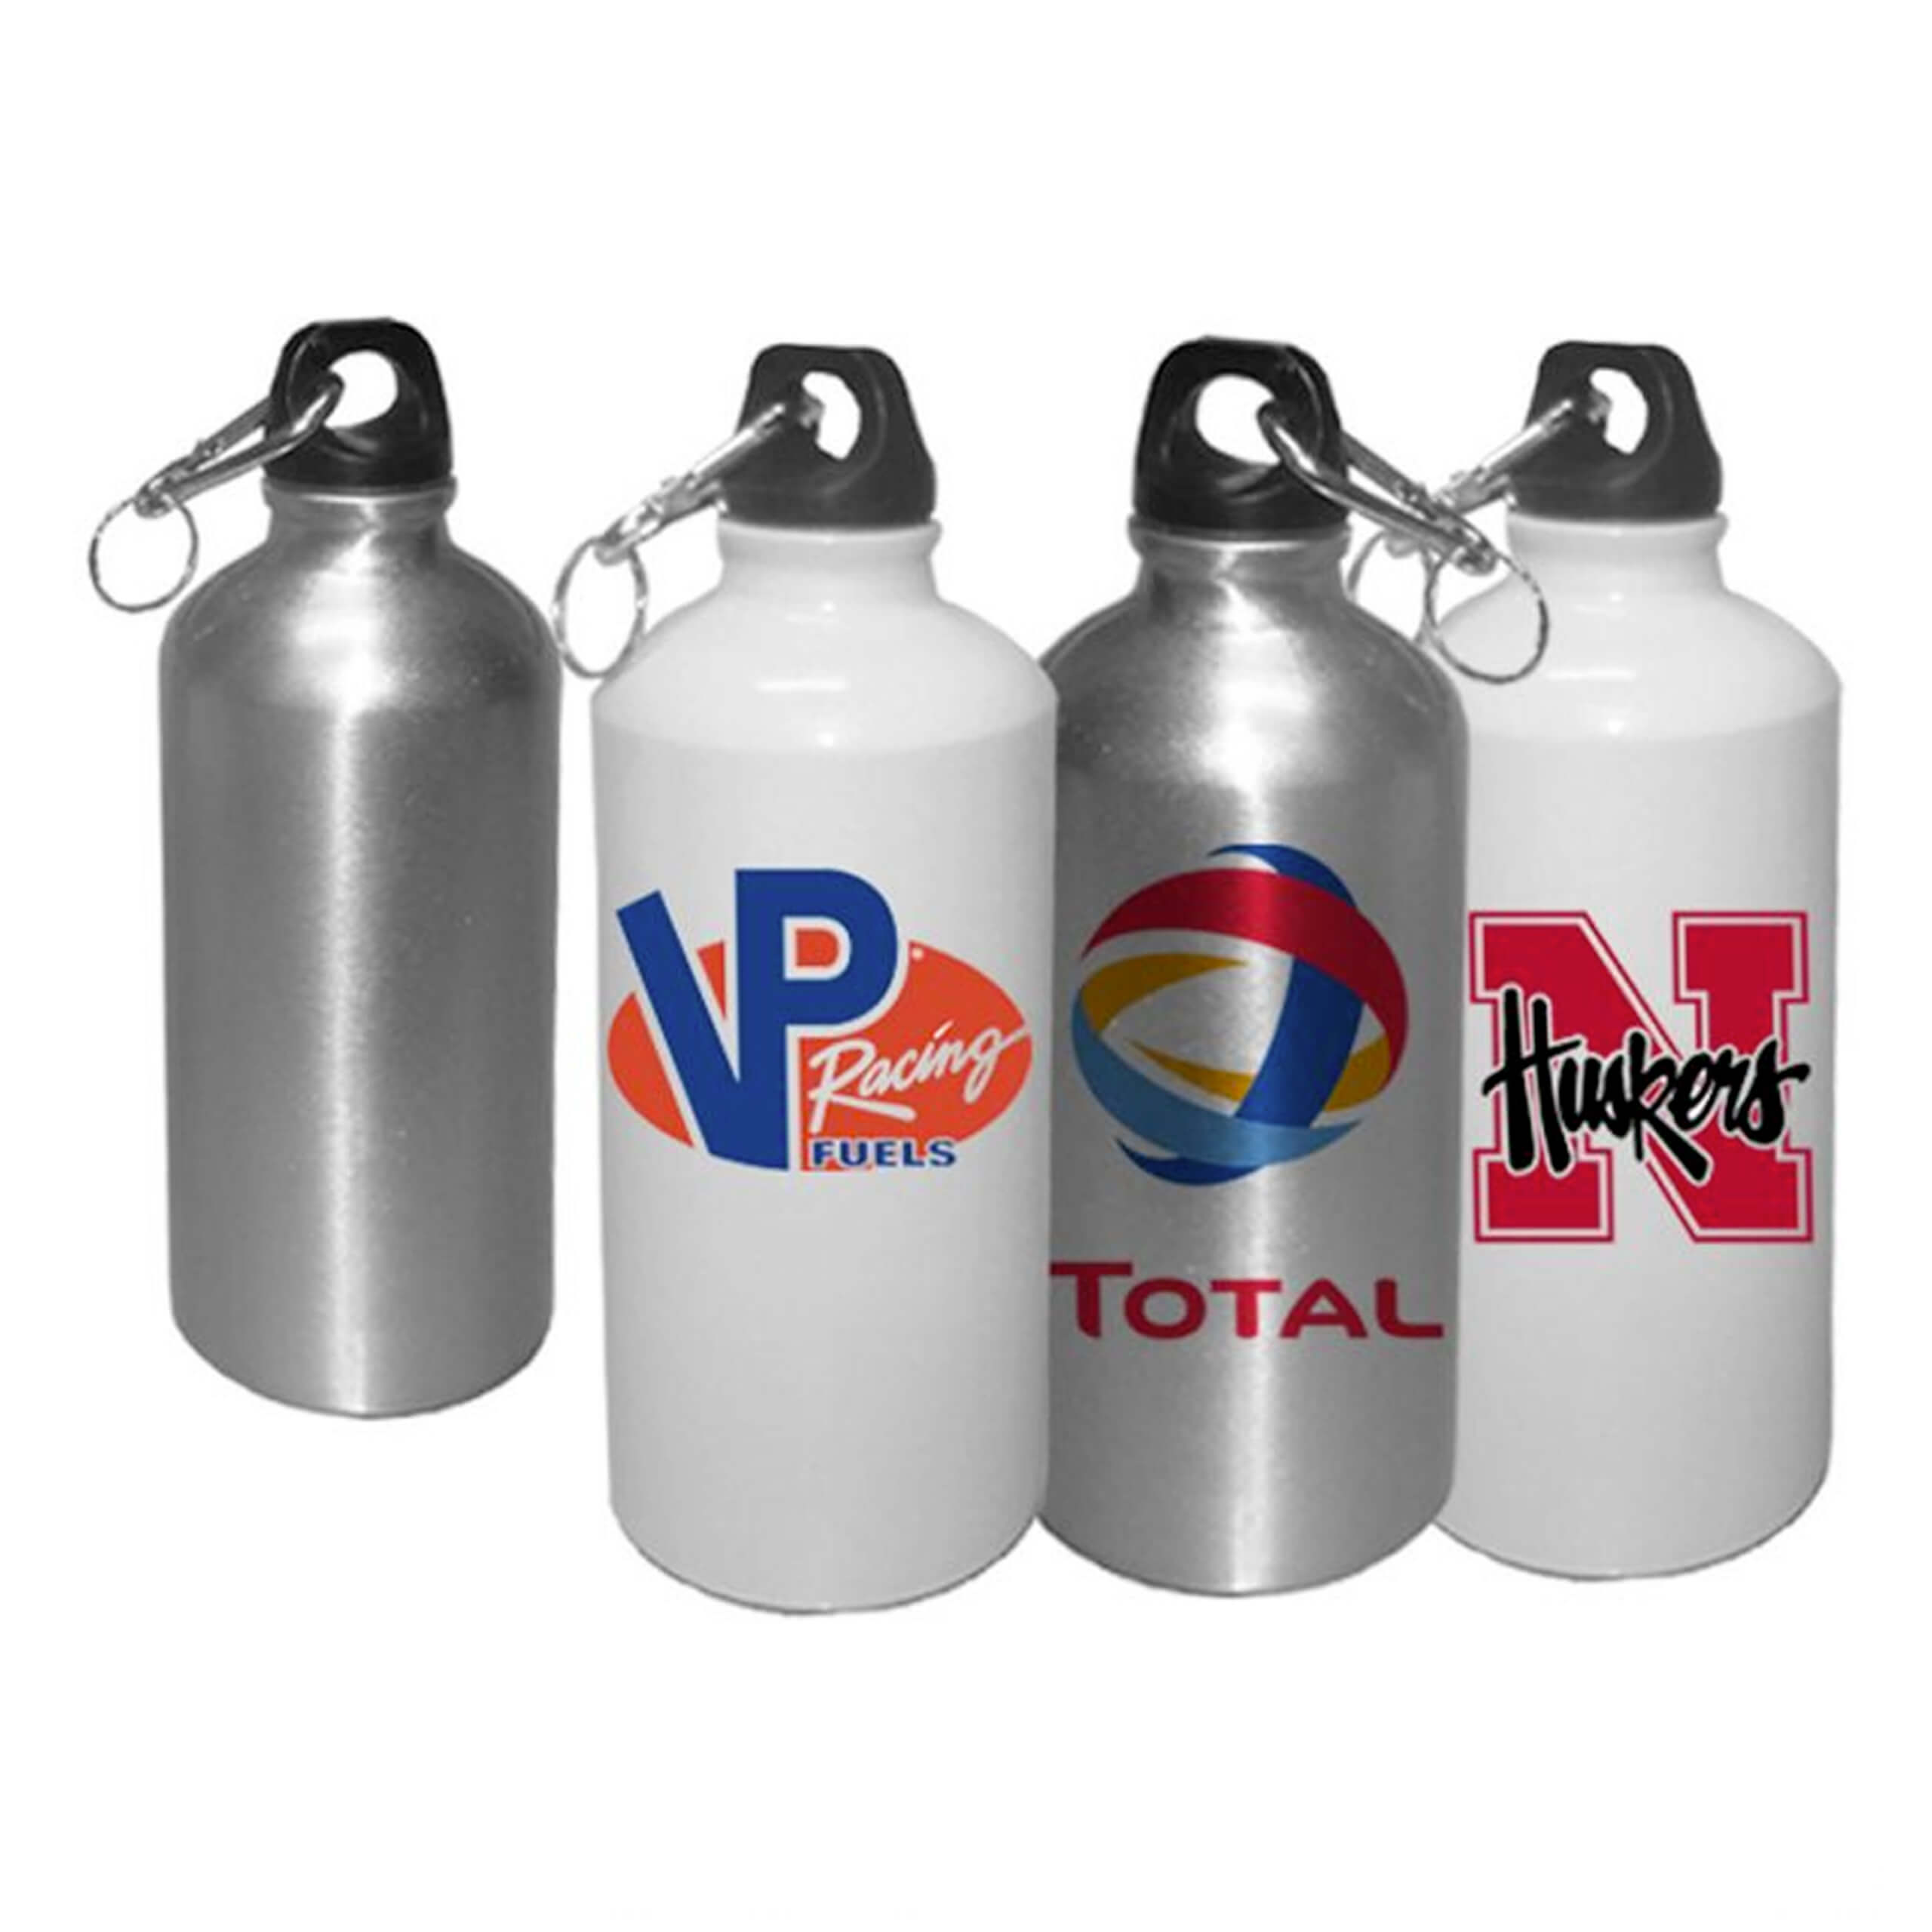 Starter Package 5 Pro Mini Tumbler Heat Press 11 oz 15 oz oz Sublimation  Ceramic Coffee Mugs,Thermal Tapes, and Sublimation Paper